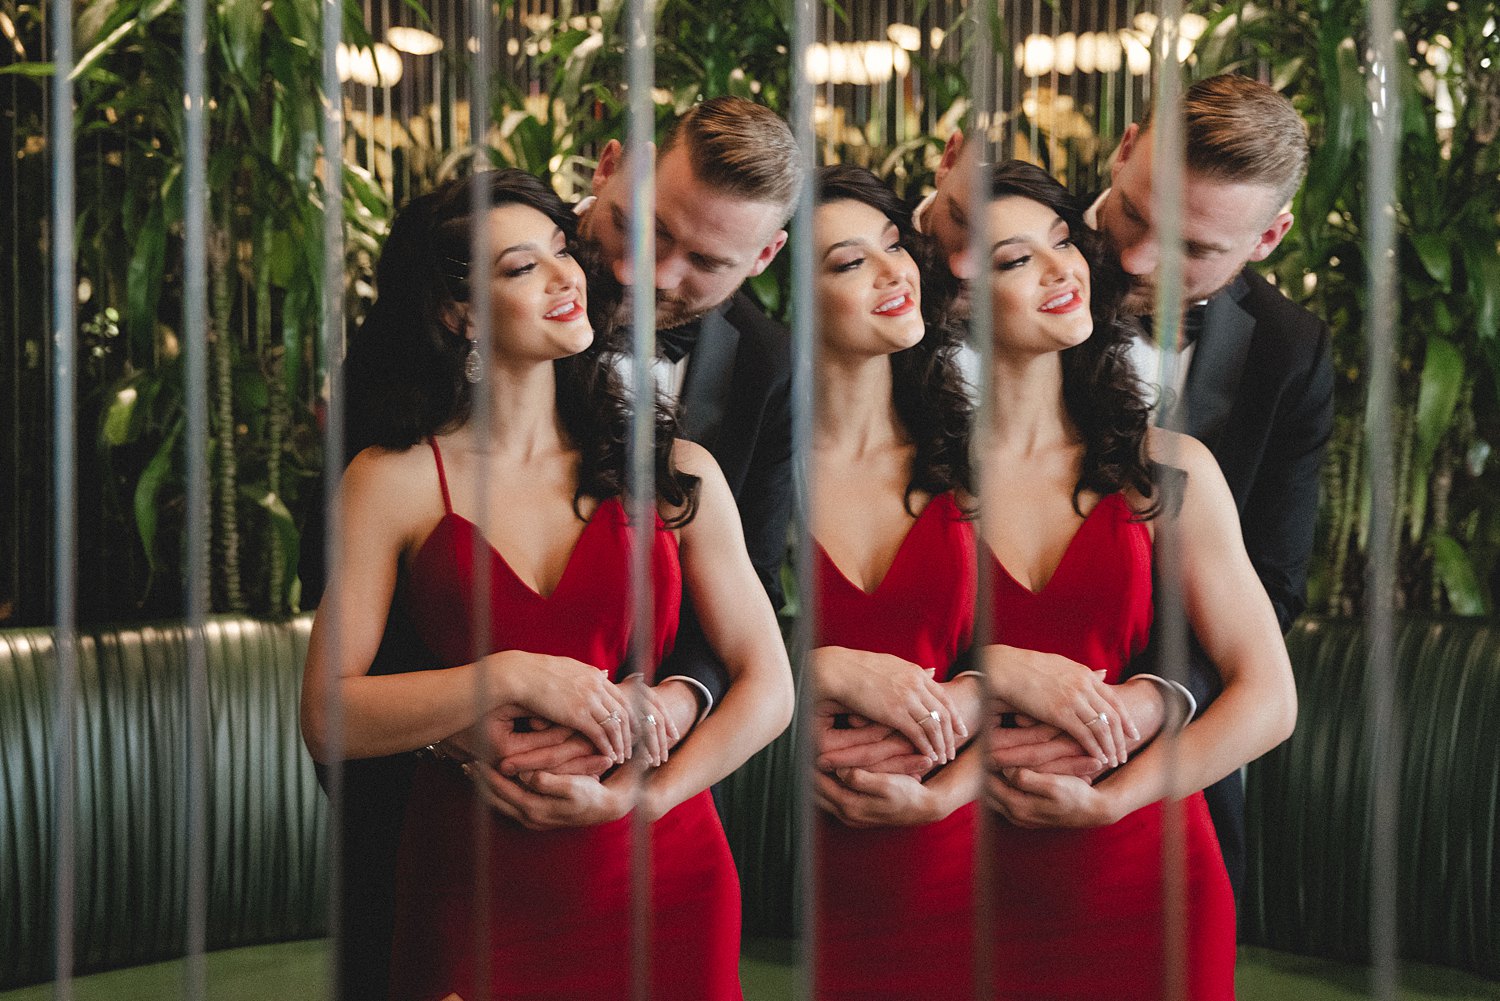 Woman in red Dress being hugged by man in black tuxedo reflected in mirrored lounge wall